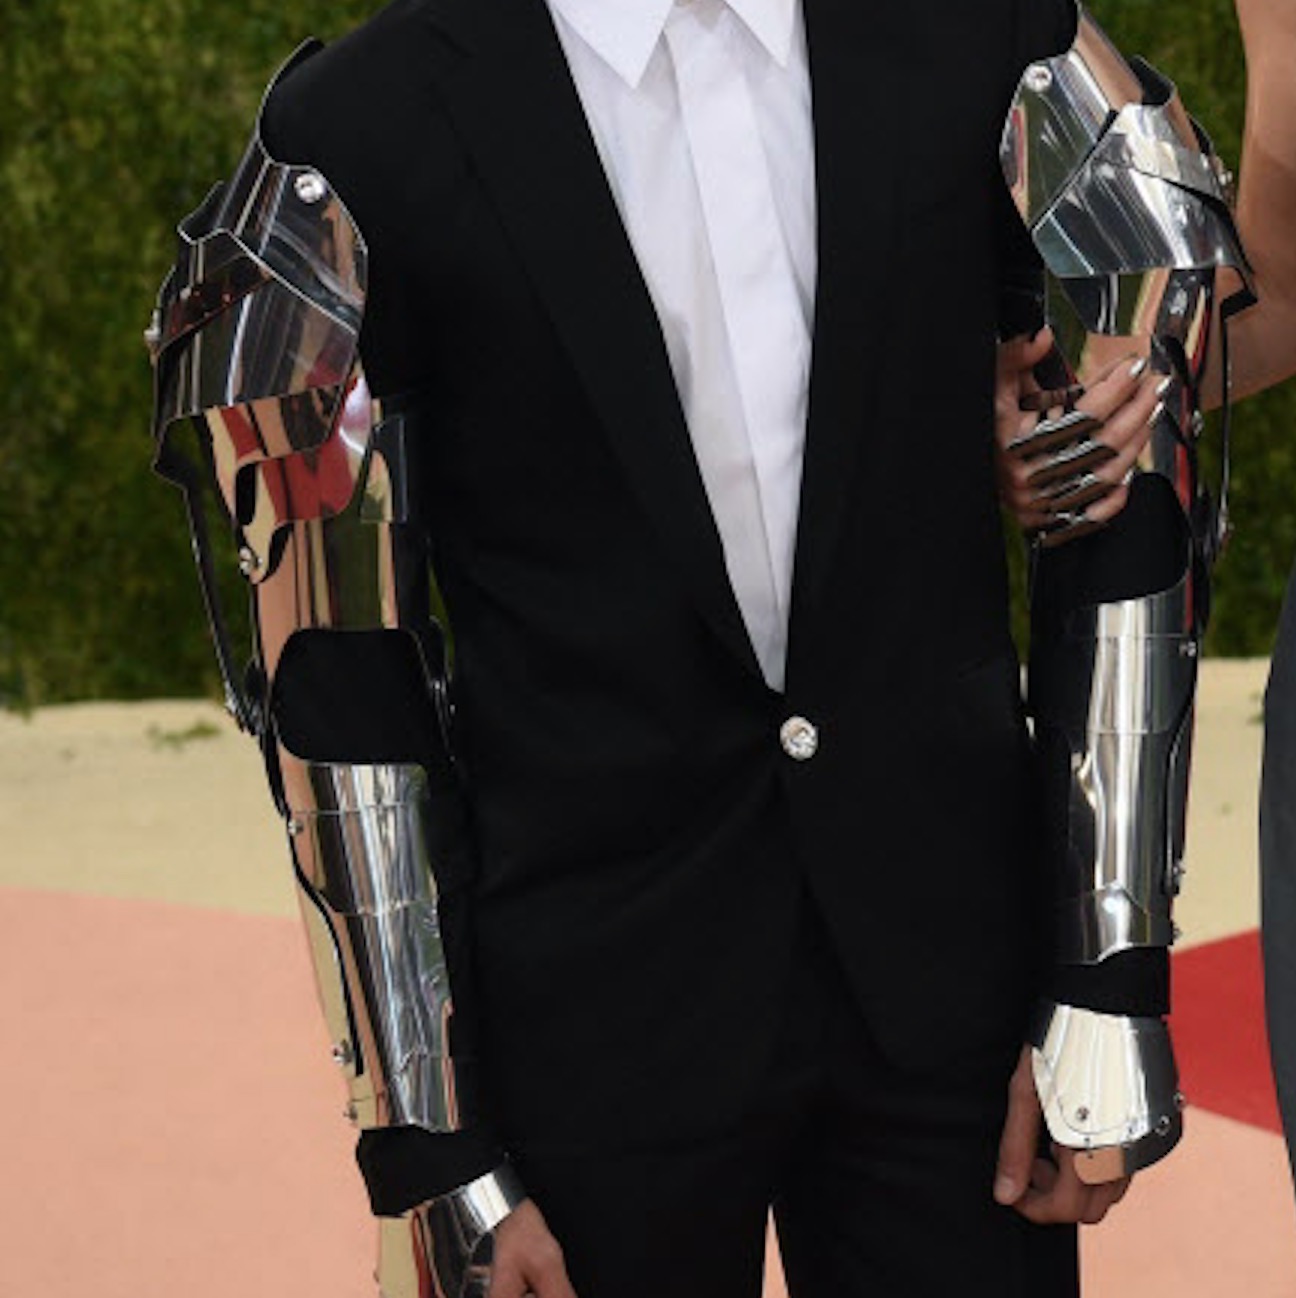 Zayn Malik's robot at the Met Gala, an ex'zayner | For The Win